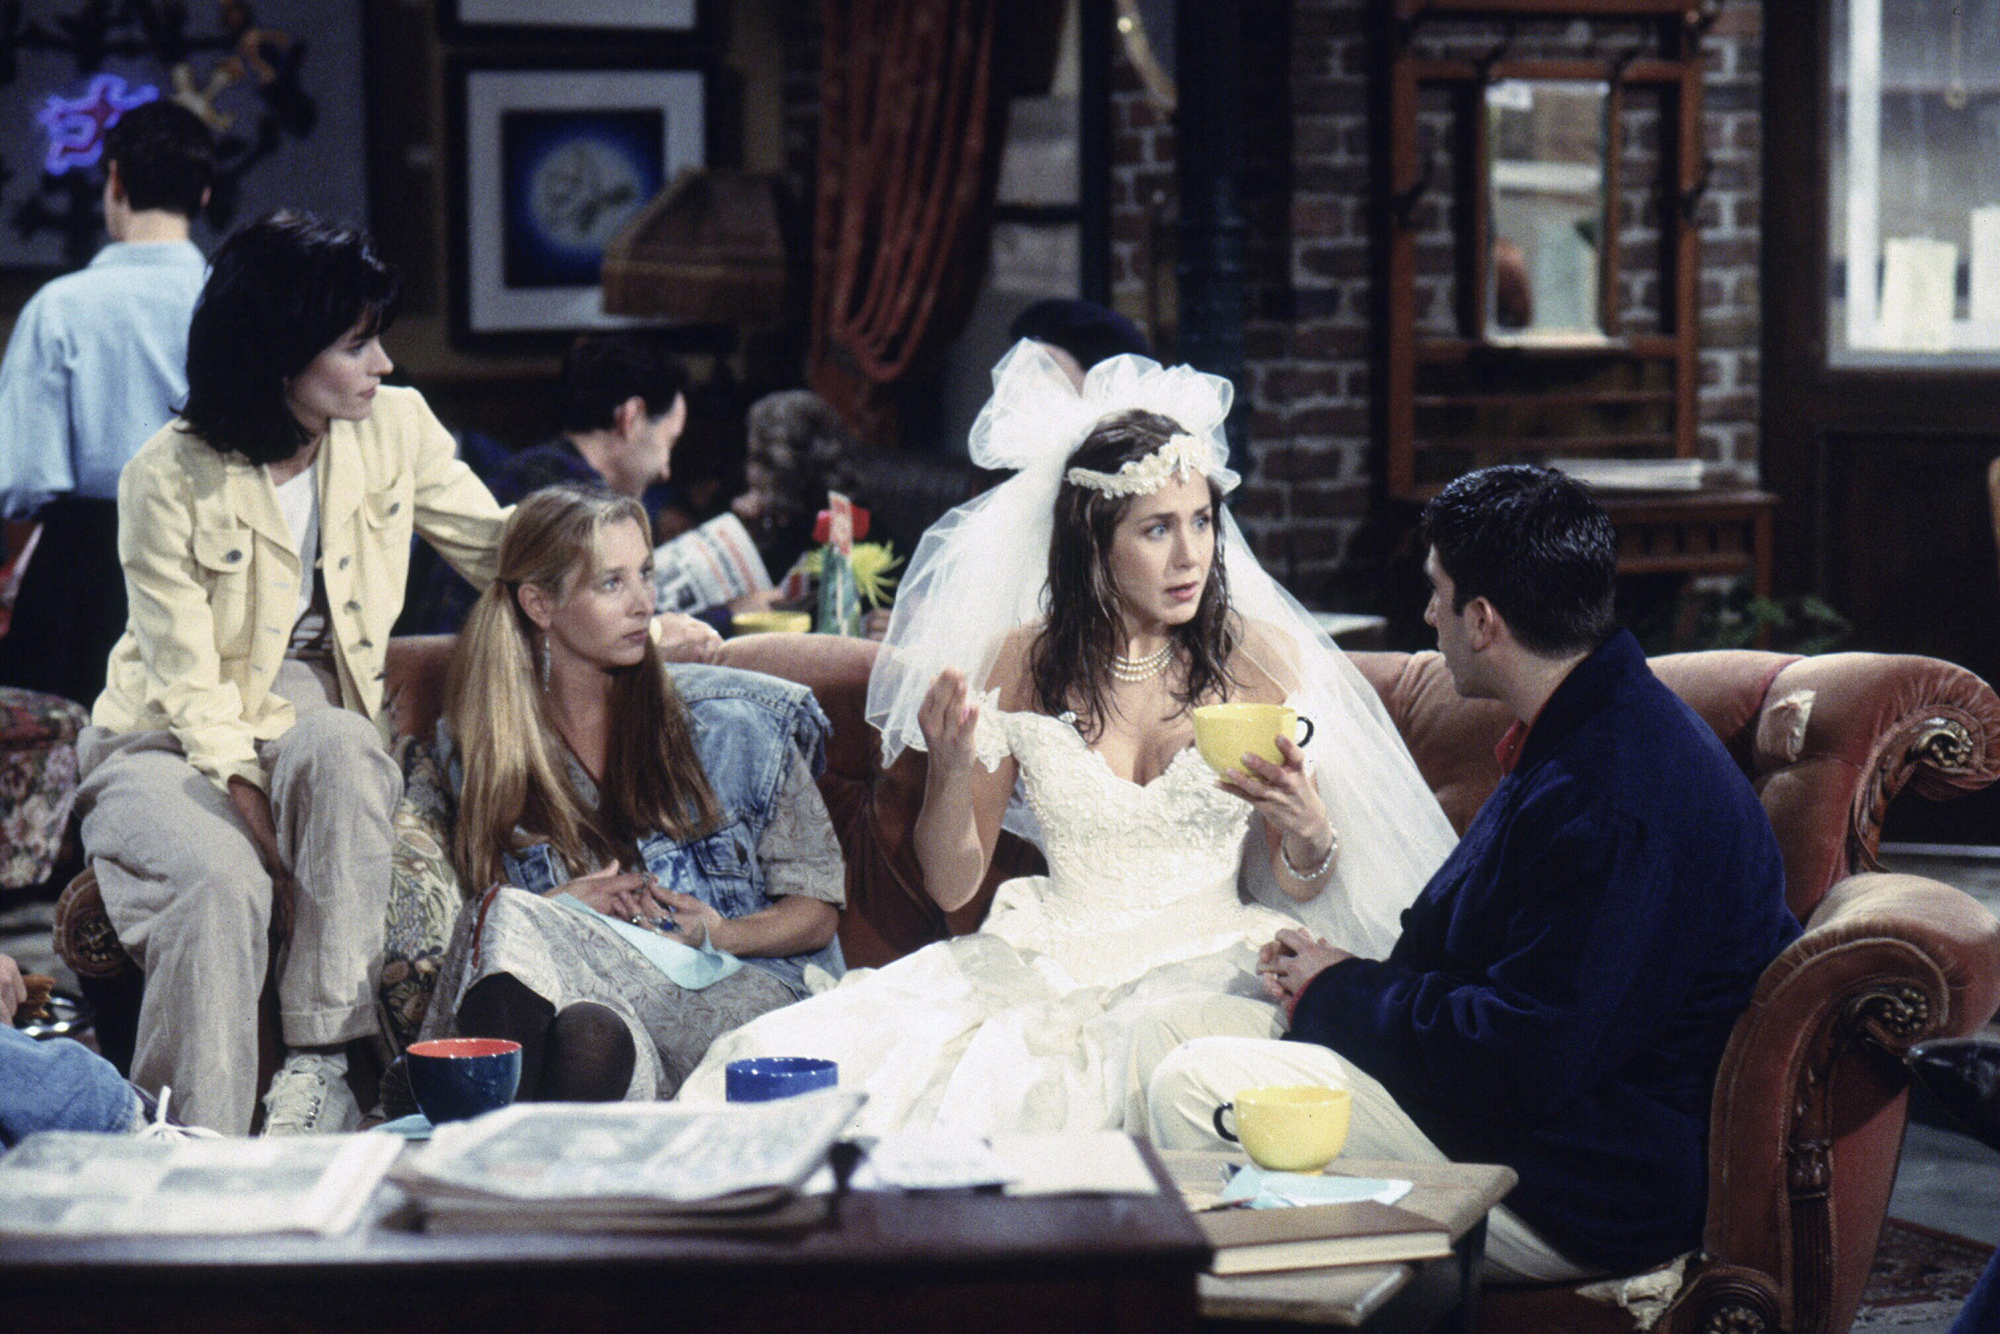 Friends' Fans Have Theory That Series is Dream By Rachel | Time